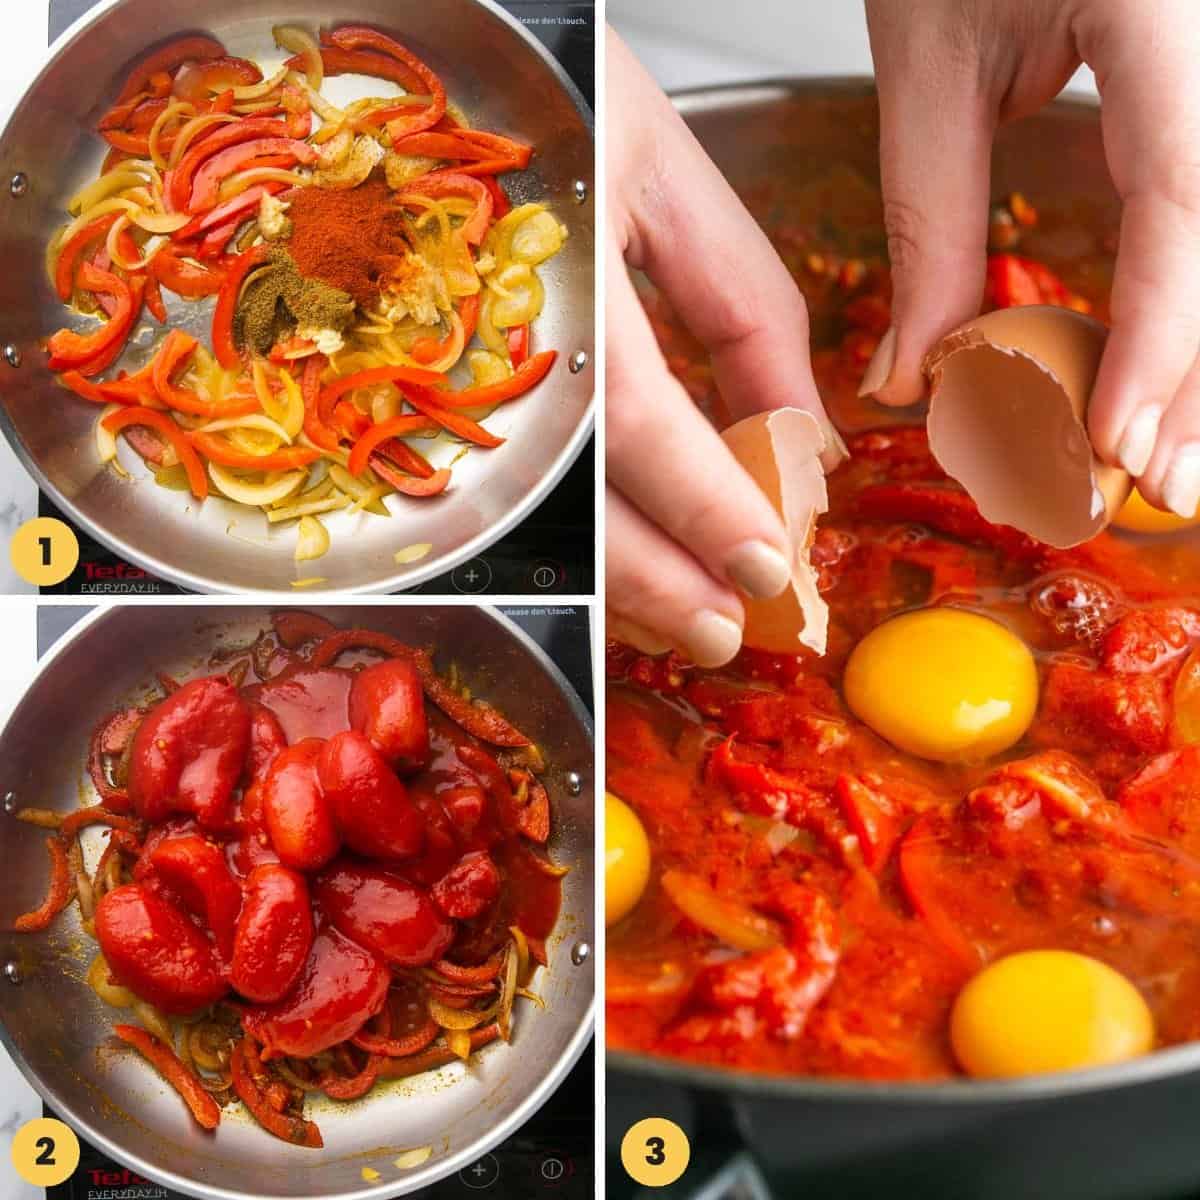 Collage of 3 images showing how to make shakshuka